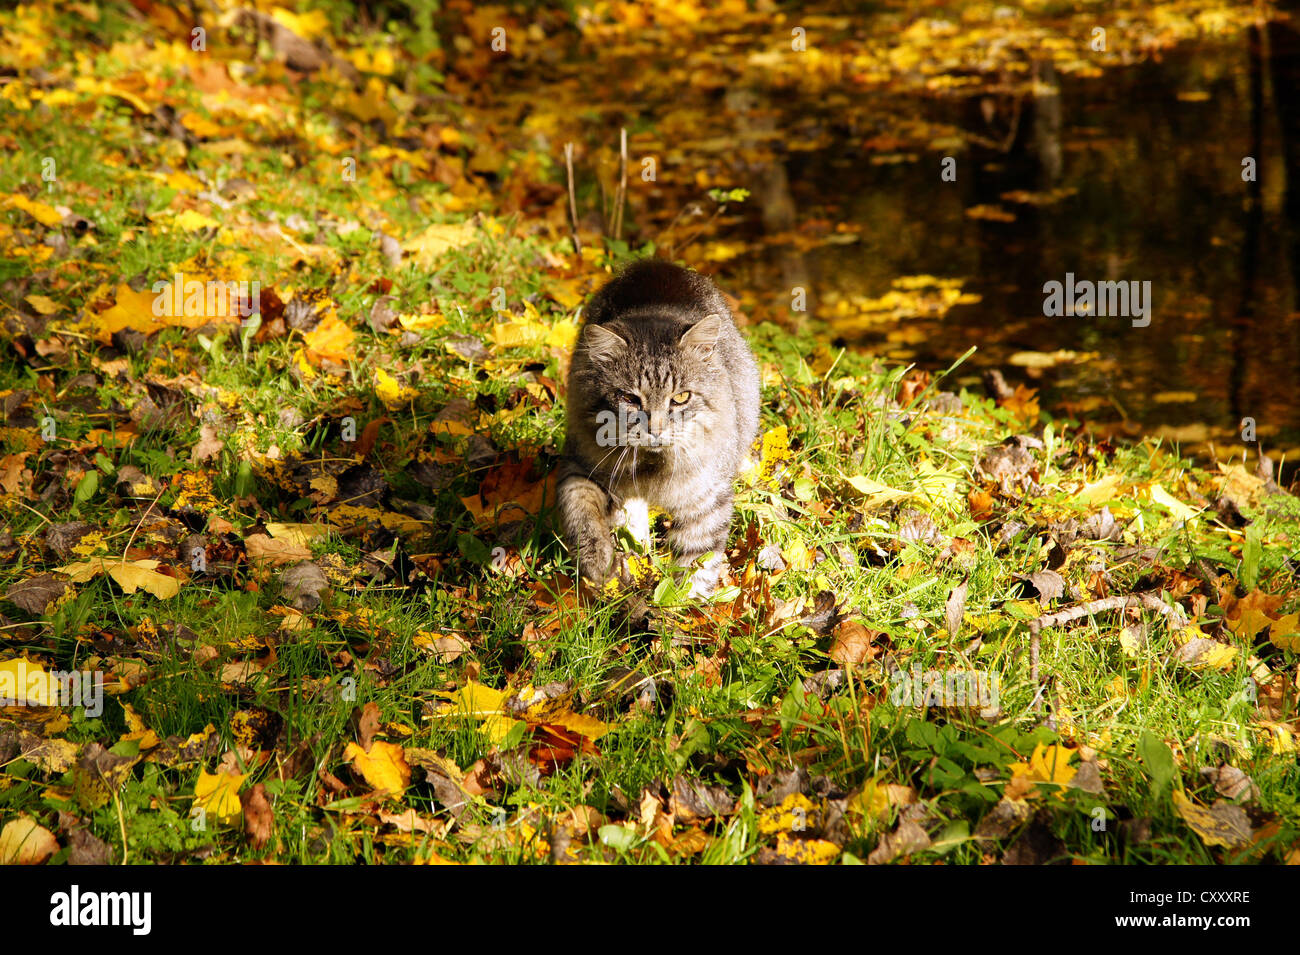 The grey cat goes on fallen down yellow leaves Stock Photo